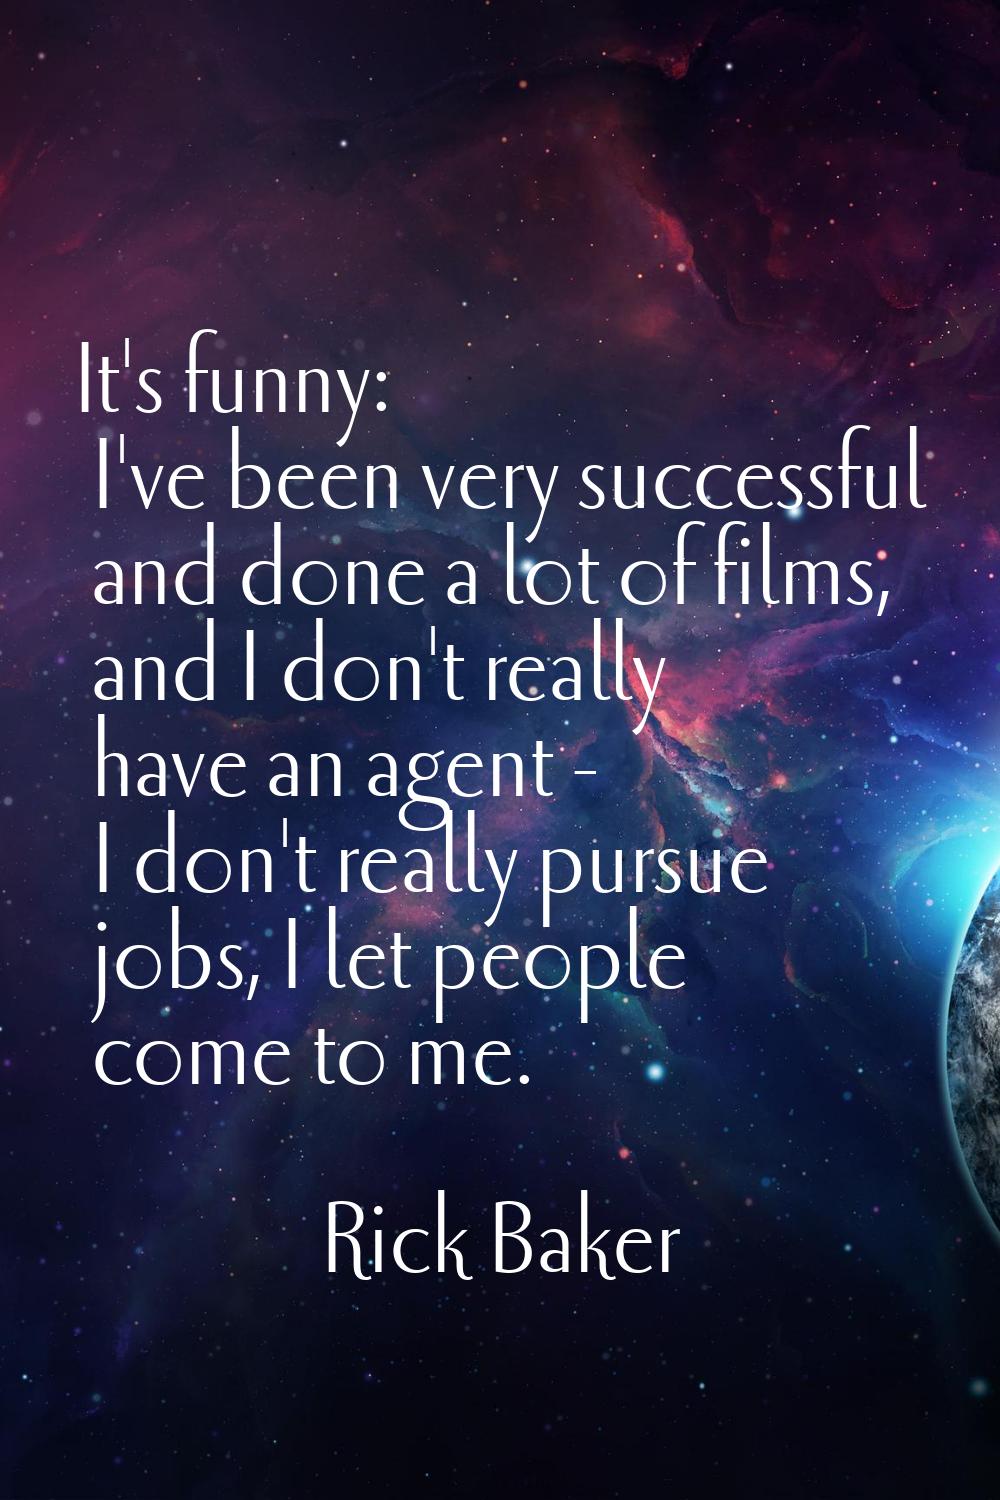 It's funny: I've been very successful and done a lot of films, and I don't really have an agent - I